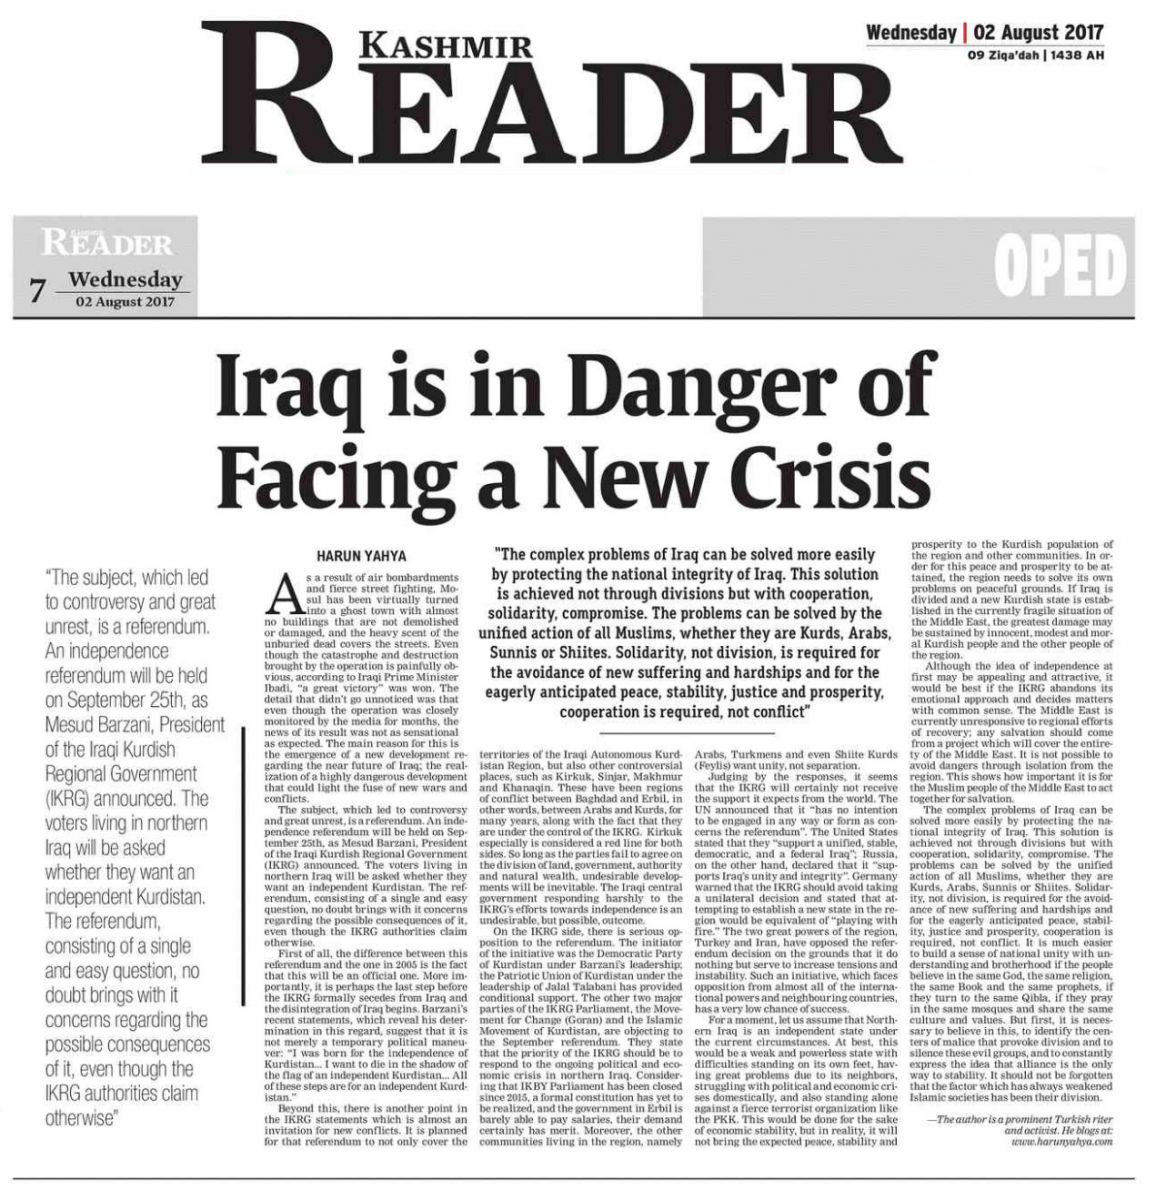 Iraq is in Danger of Facing a New Crisis